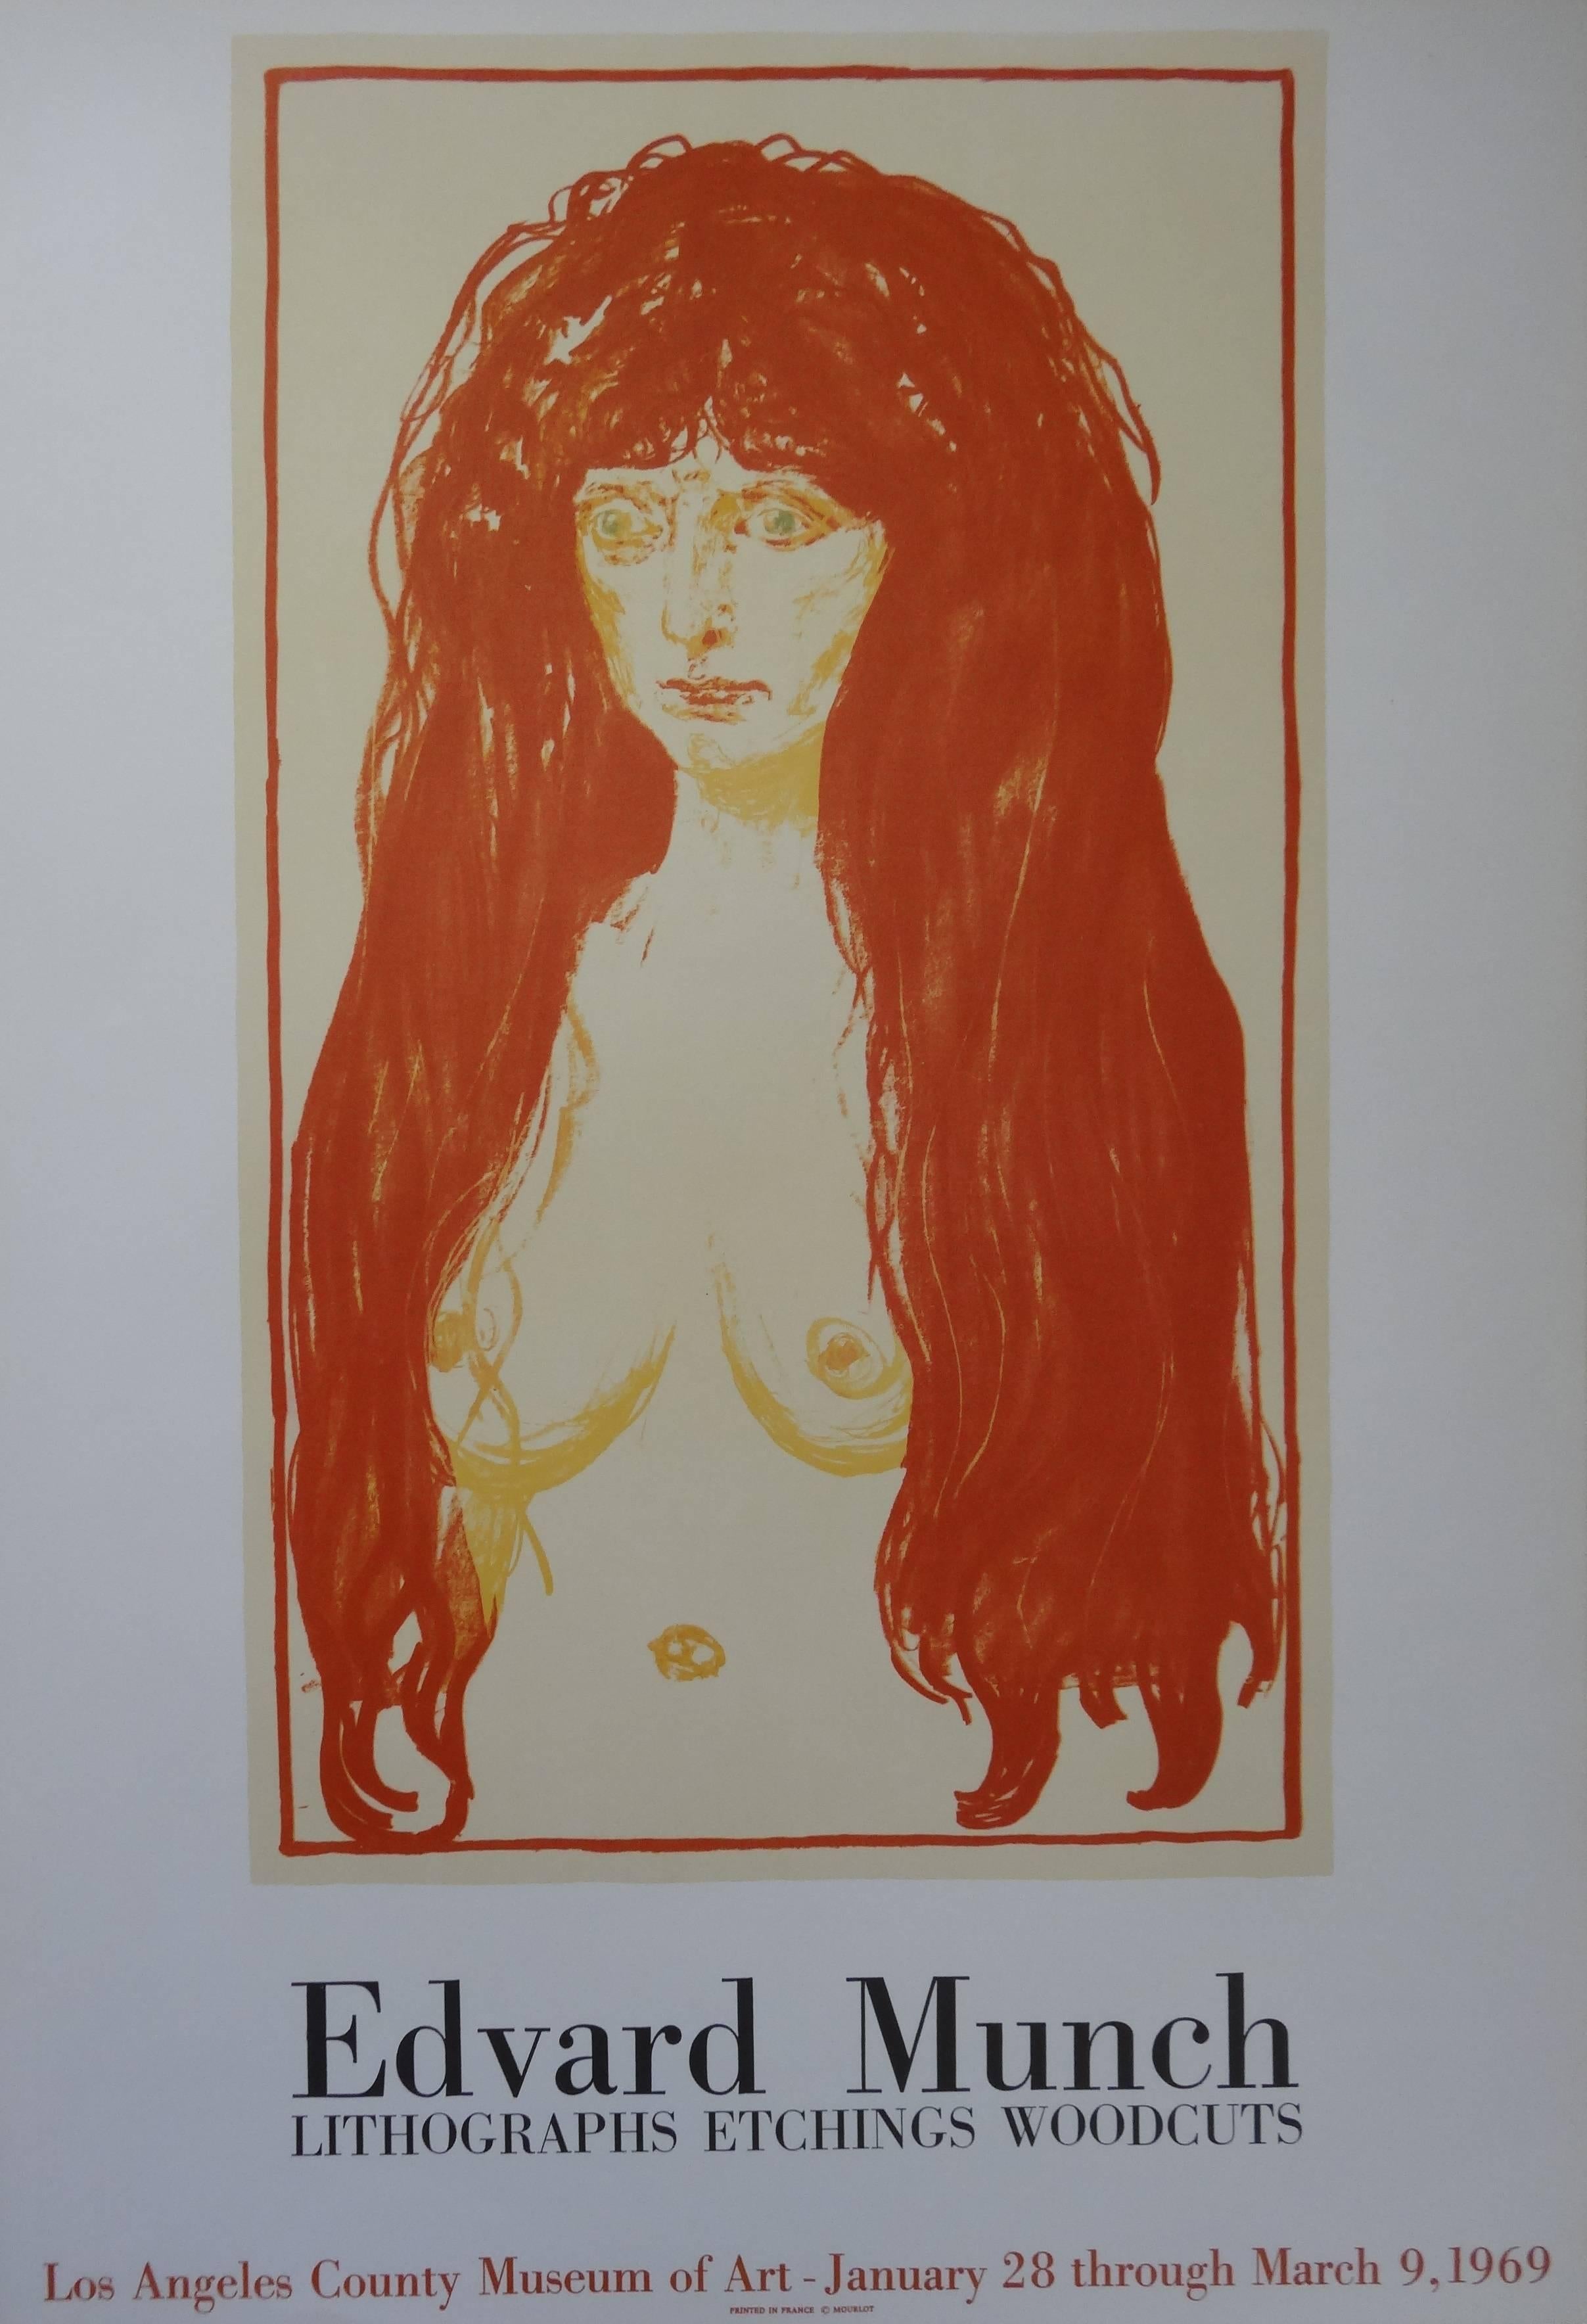 Redhead Woman - Lithograph Exhibition Poster #Los Angeles County Museum #MOURLOT